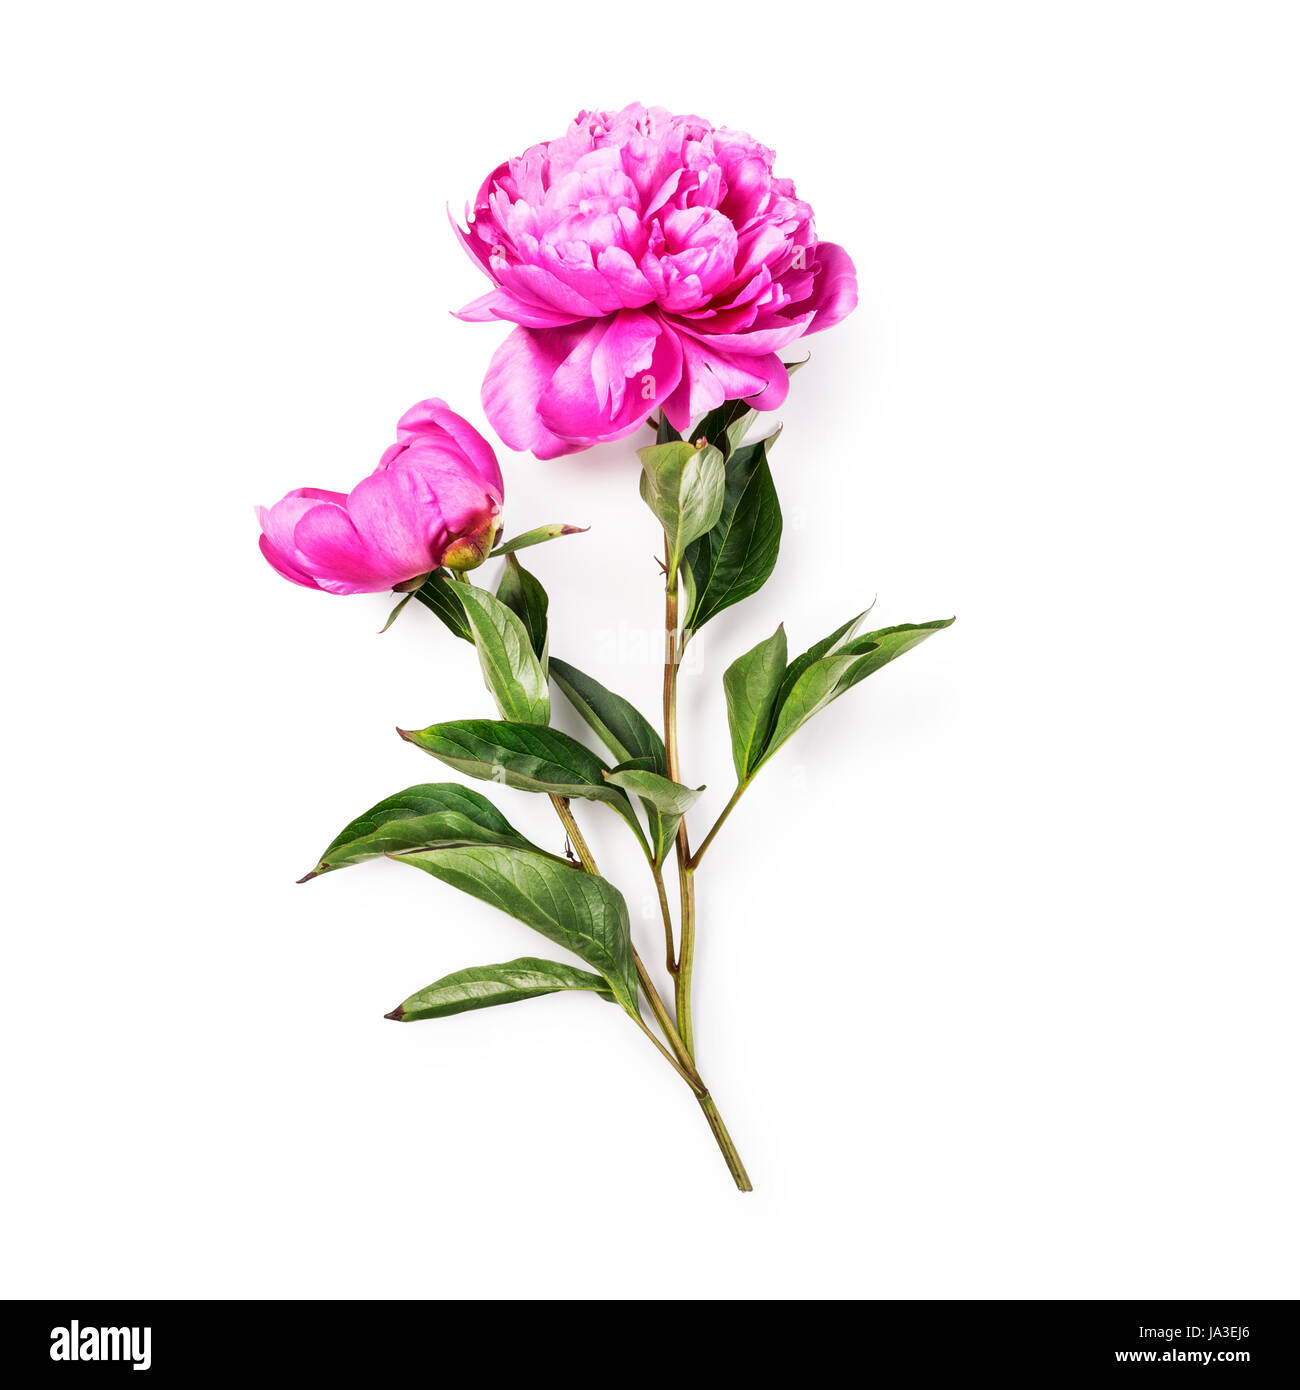 Pink peony flower with stem and leaves. Objects group isolated on white background clipping path included. Summer garden flowers Stock Photo